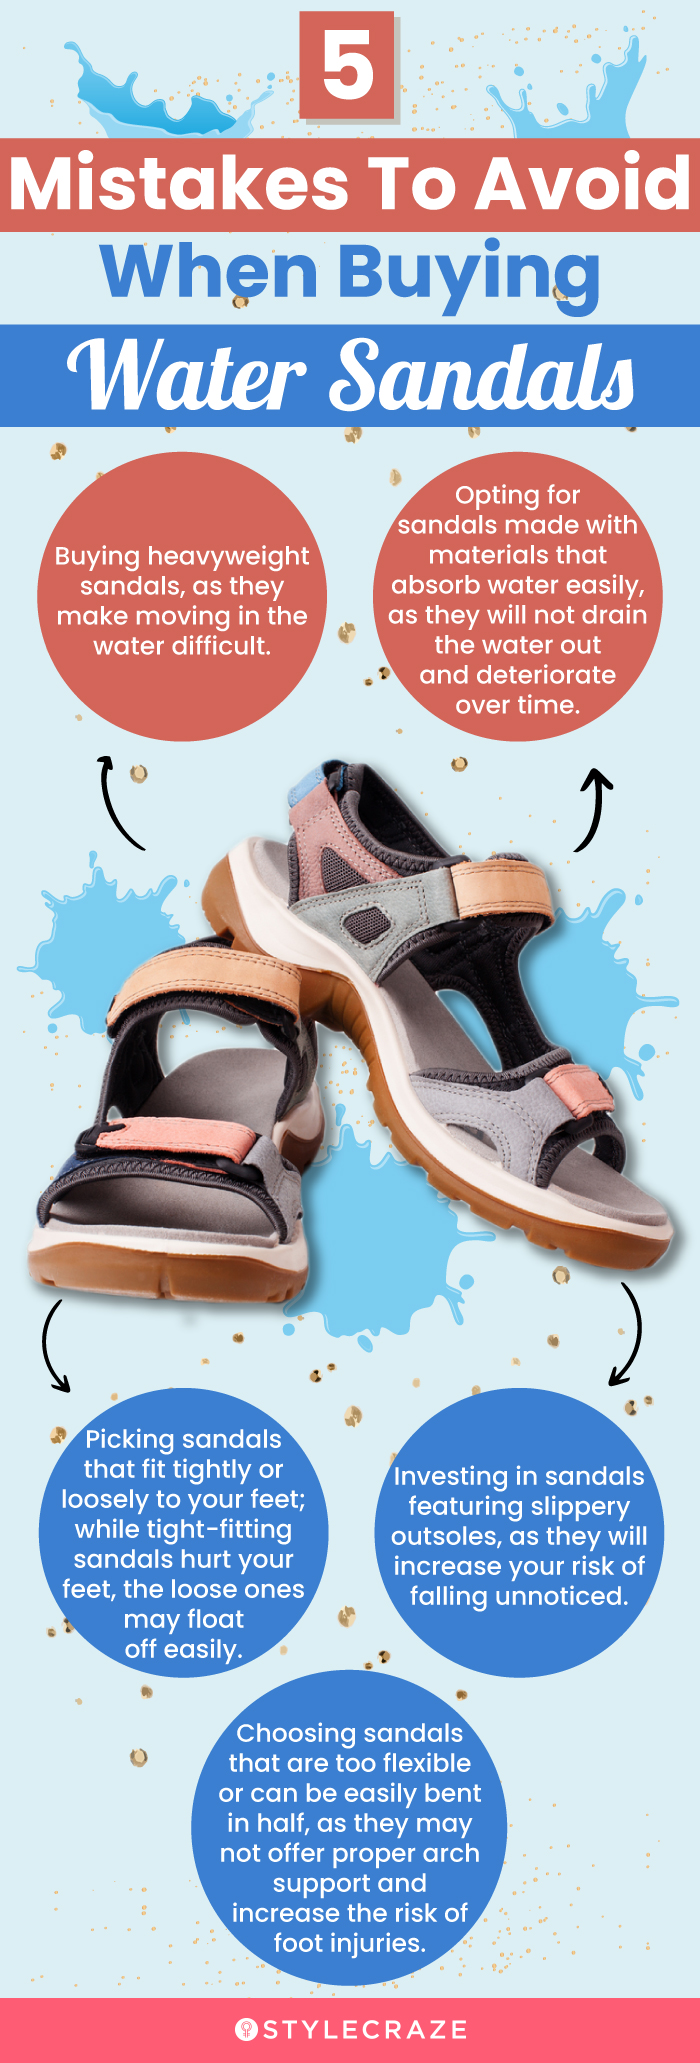 5 Mistakes To Avoid When Buying Water Sandals (infographic)